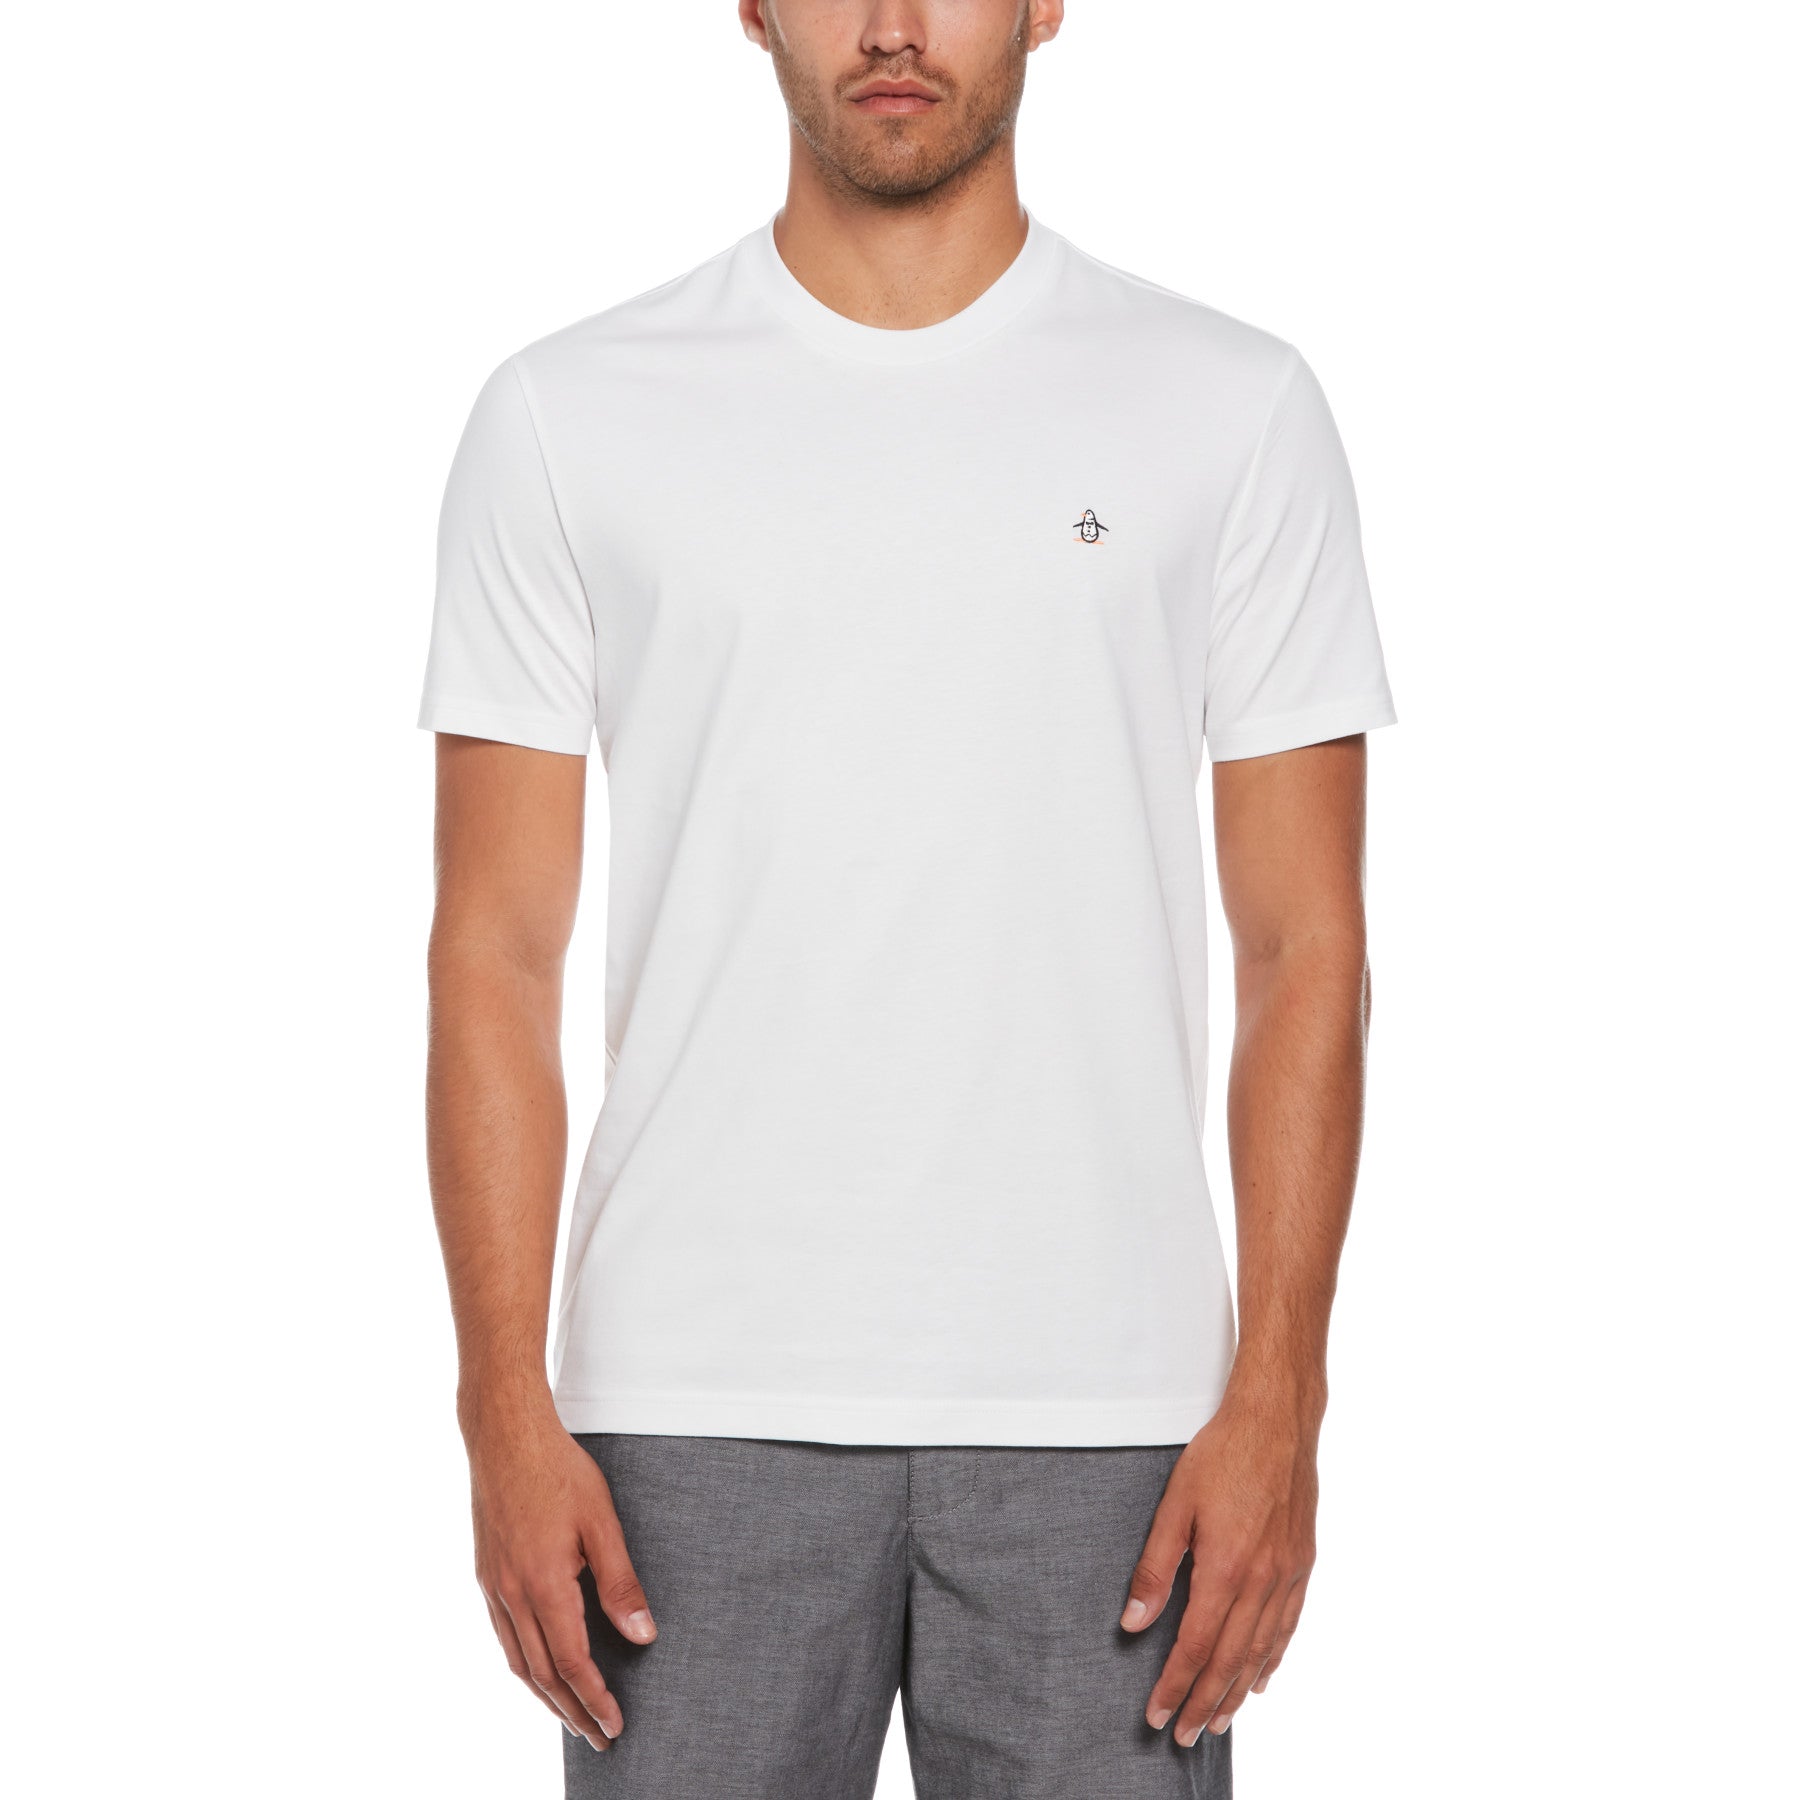 View Icons Organic Cotton Jersey TV Pete TShirt In Bright White information